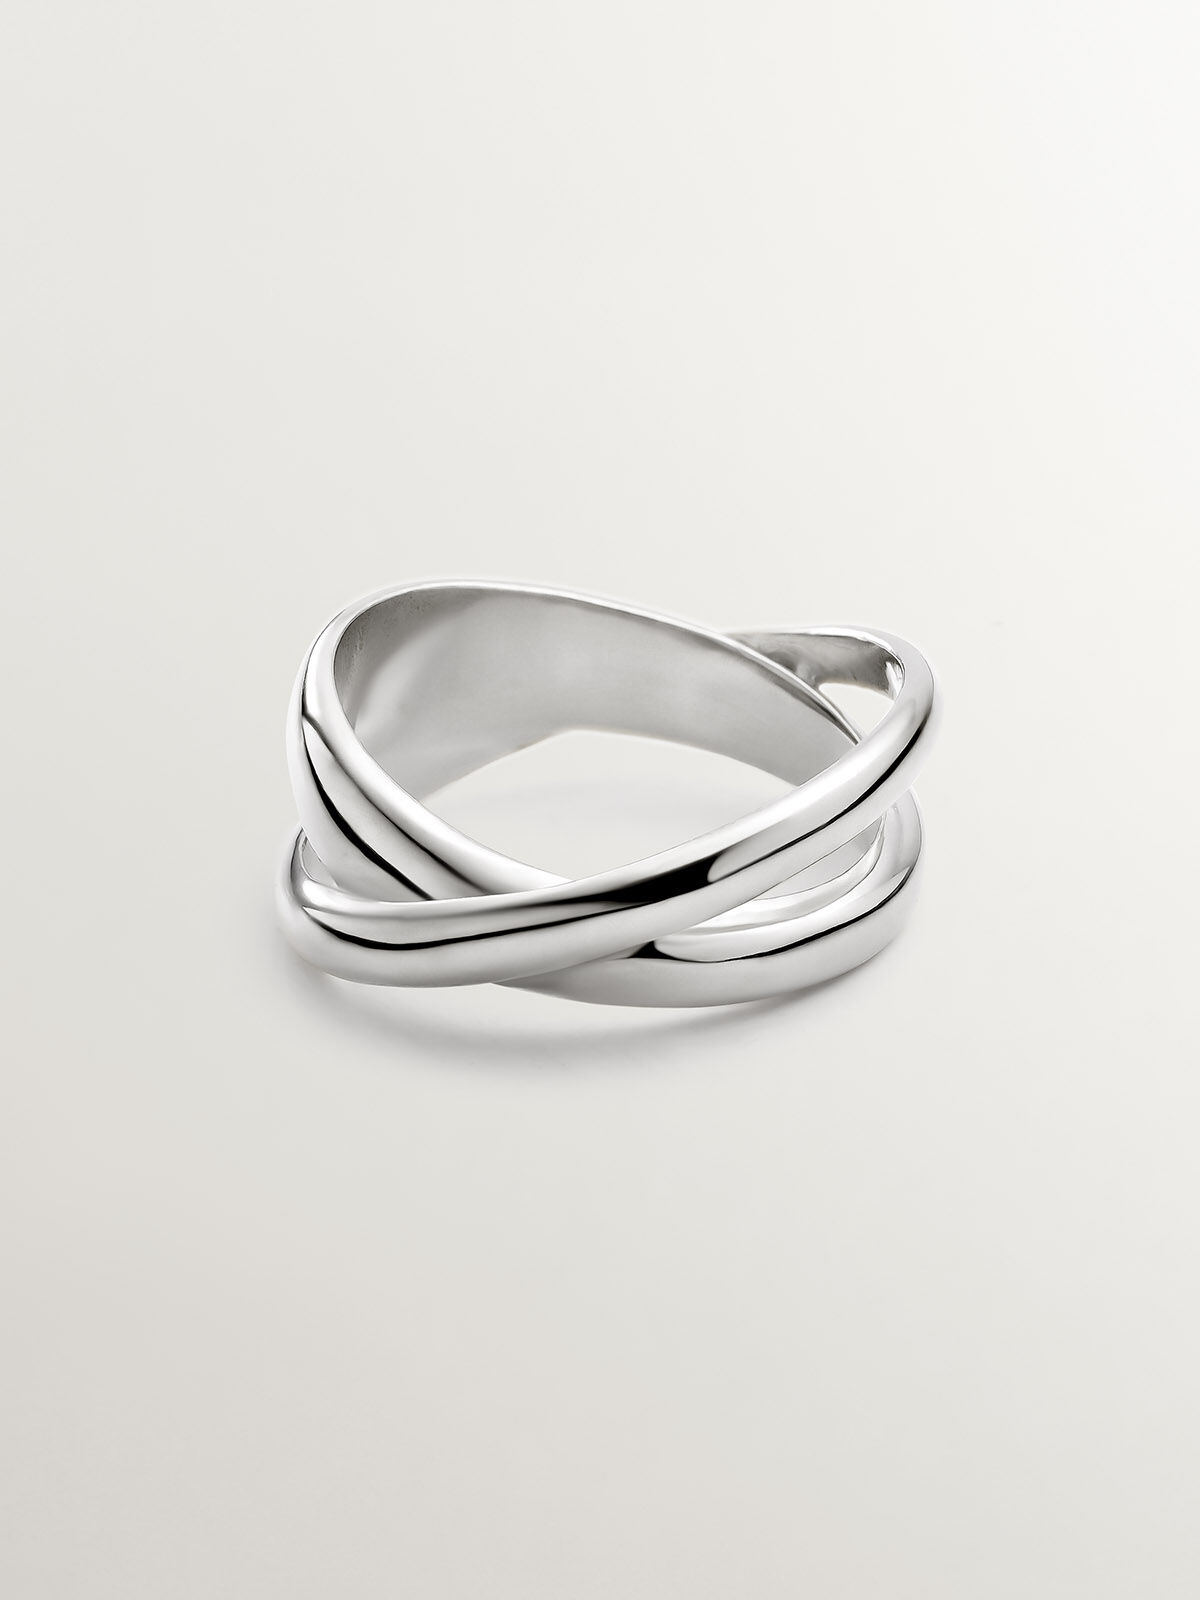 929 Silver Double Crossed Ring | Aristocrazy